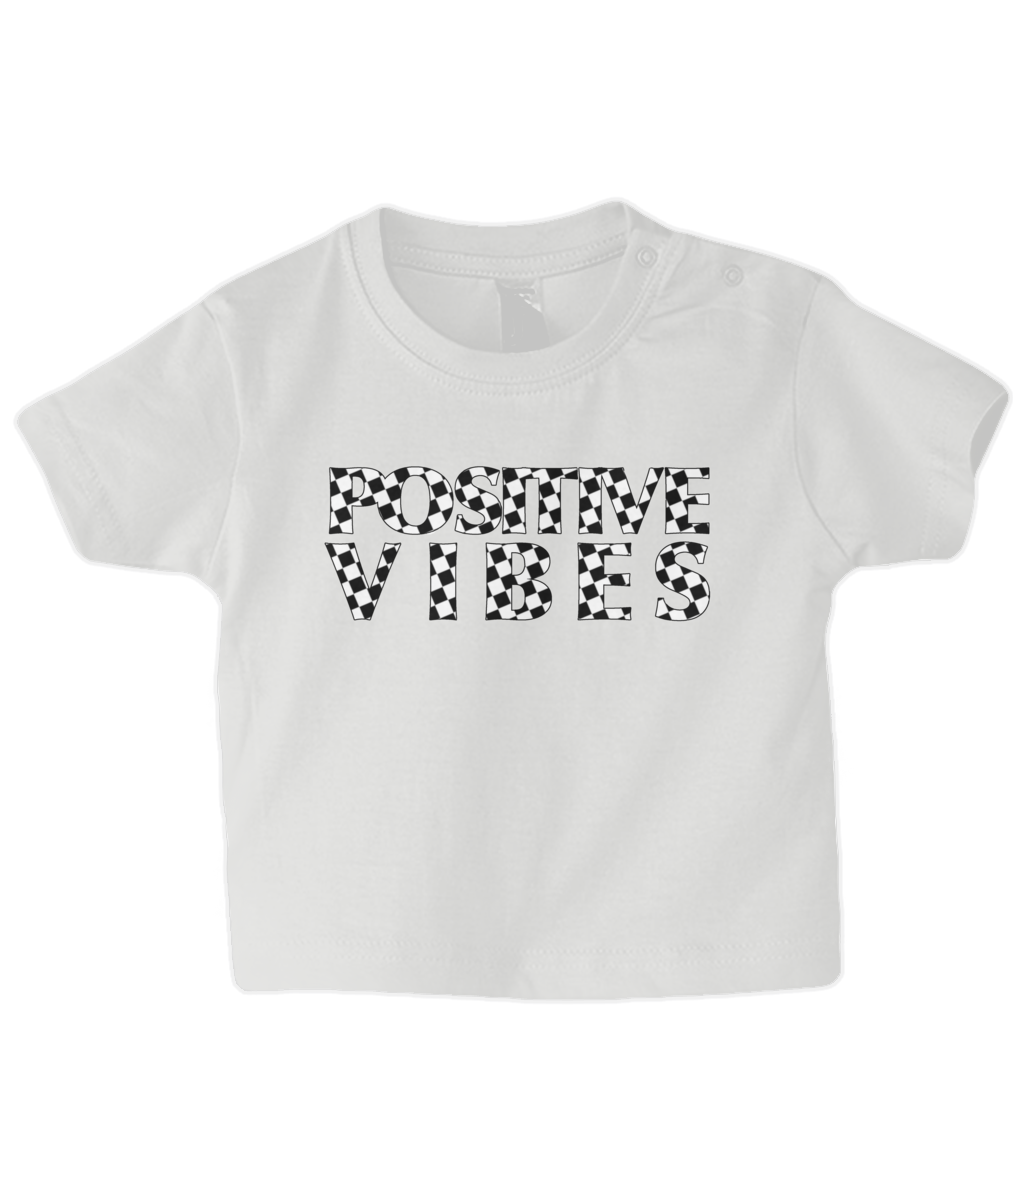 Positive Vibes white Baby T Shirt